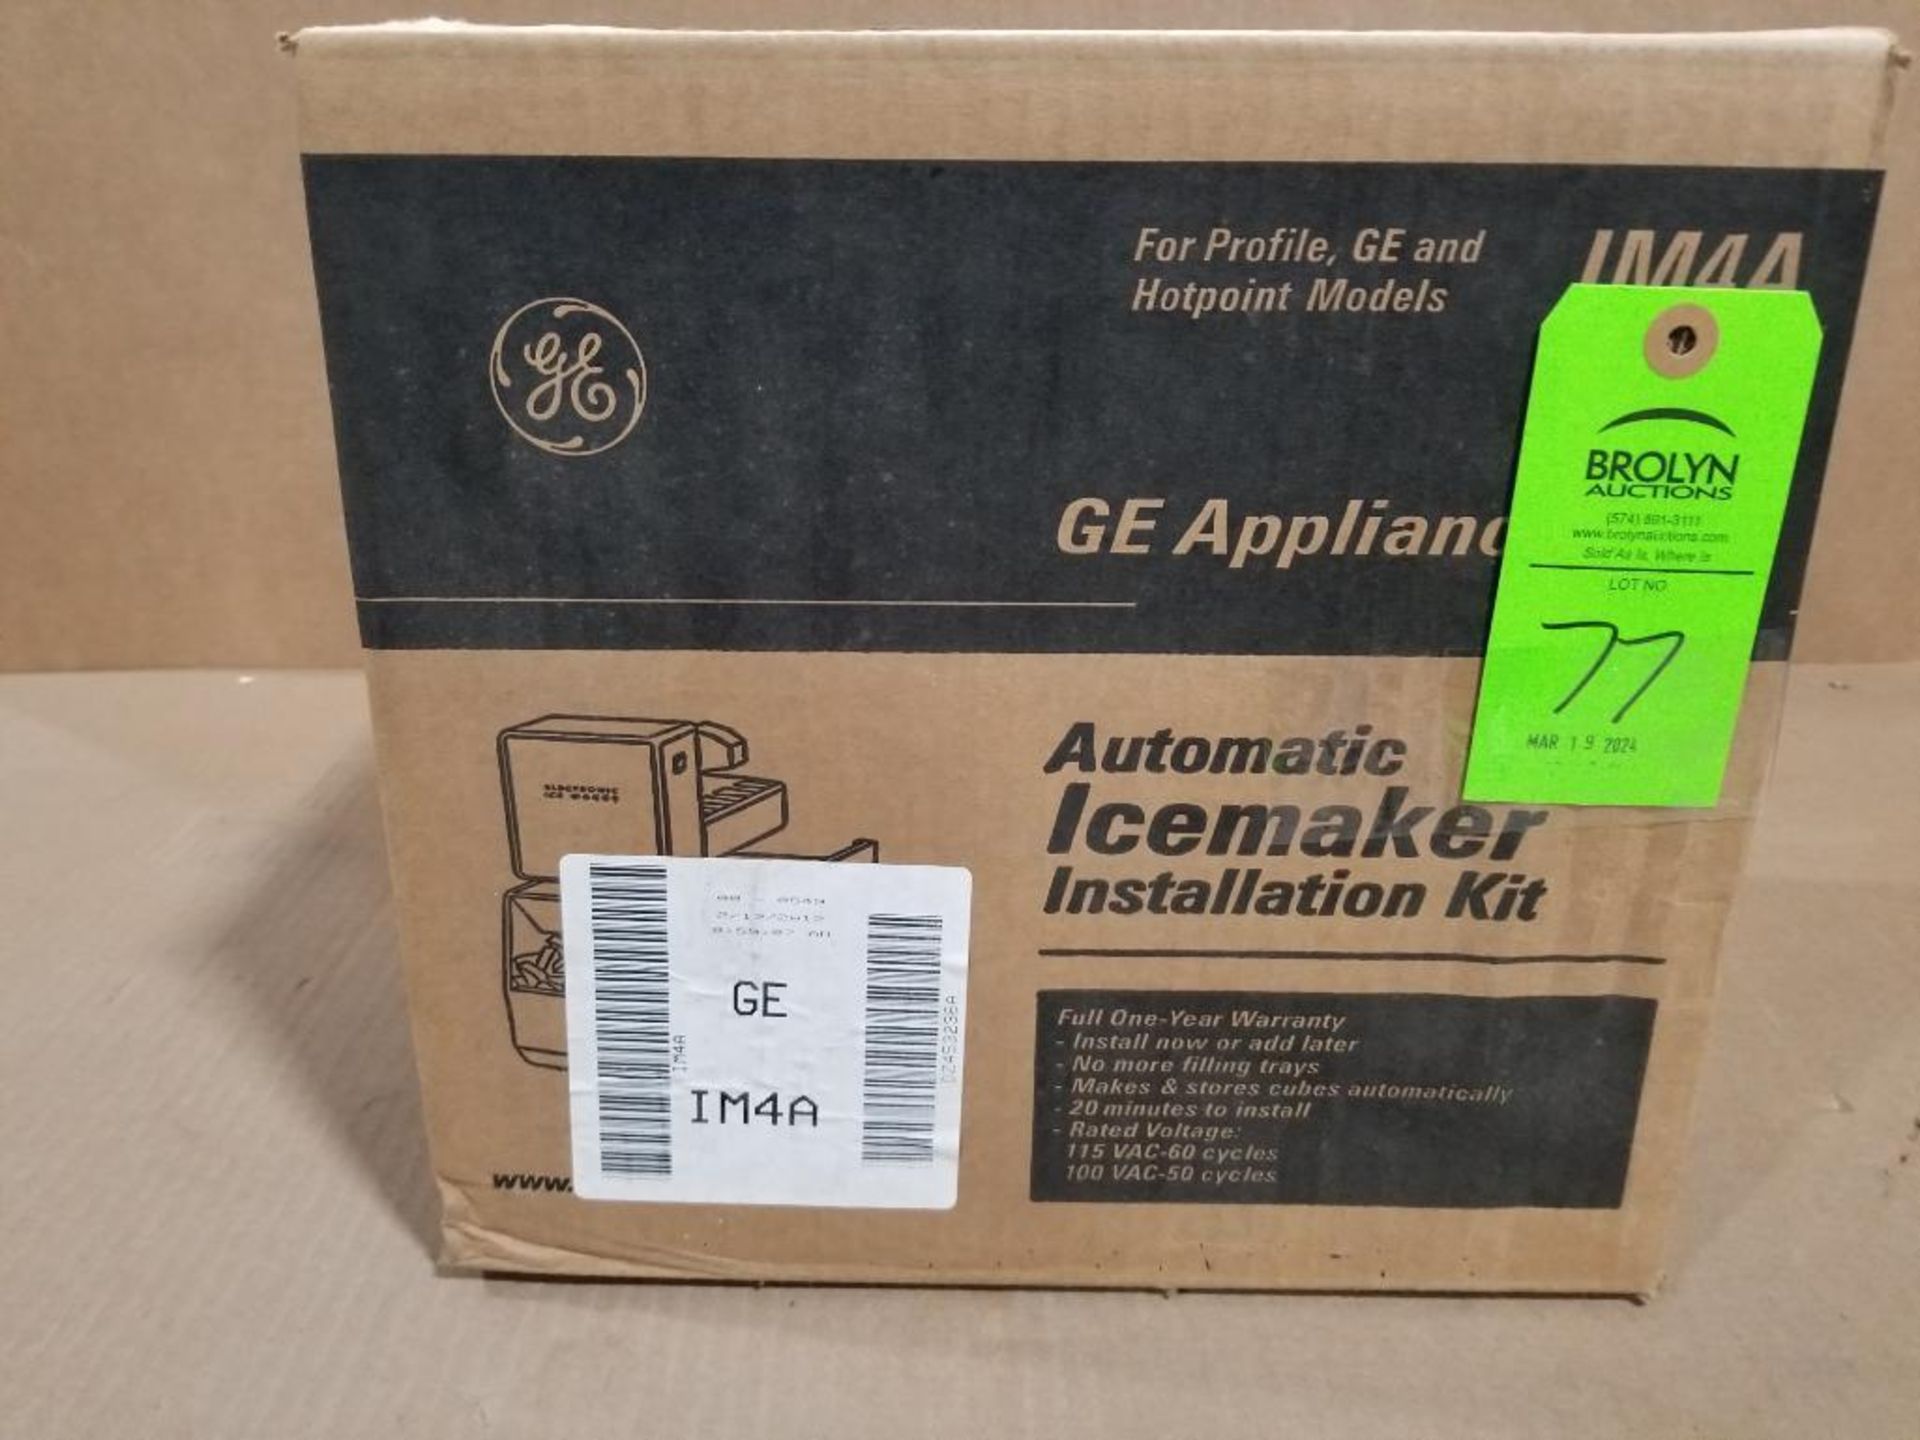 GE automatic icemaker installation kit. Model IM4A.